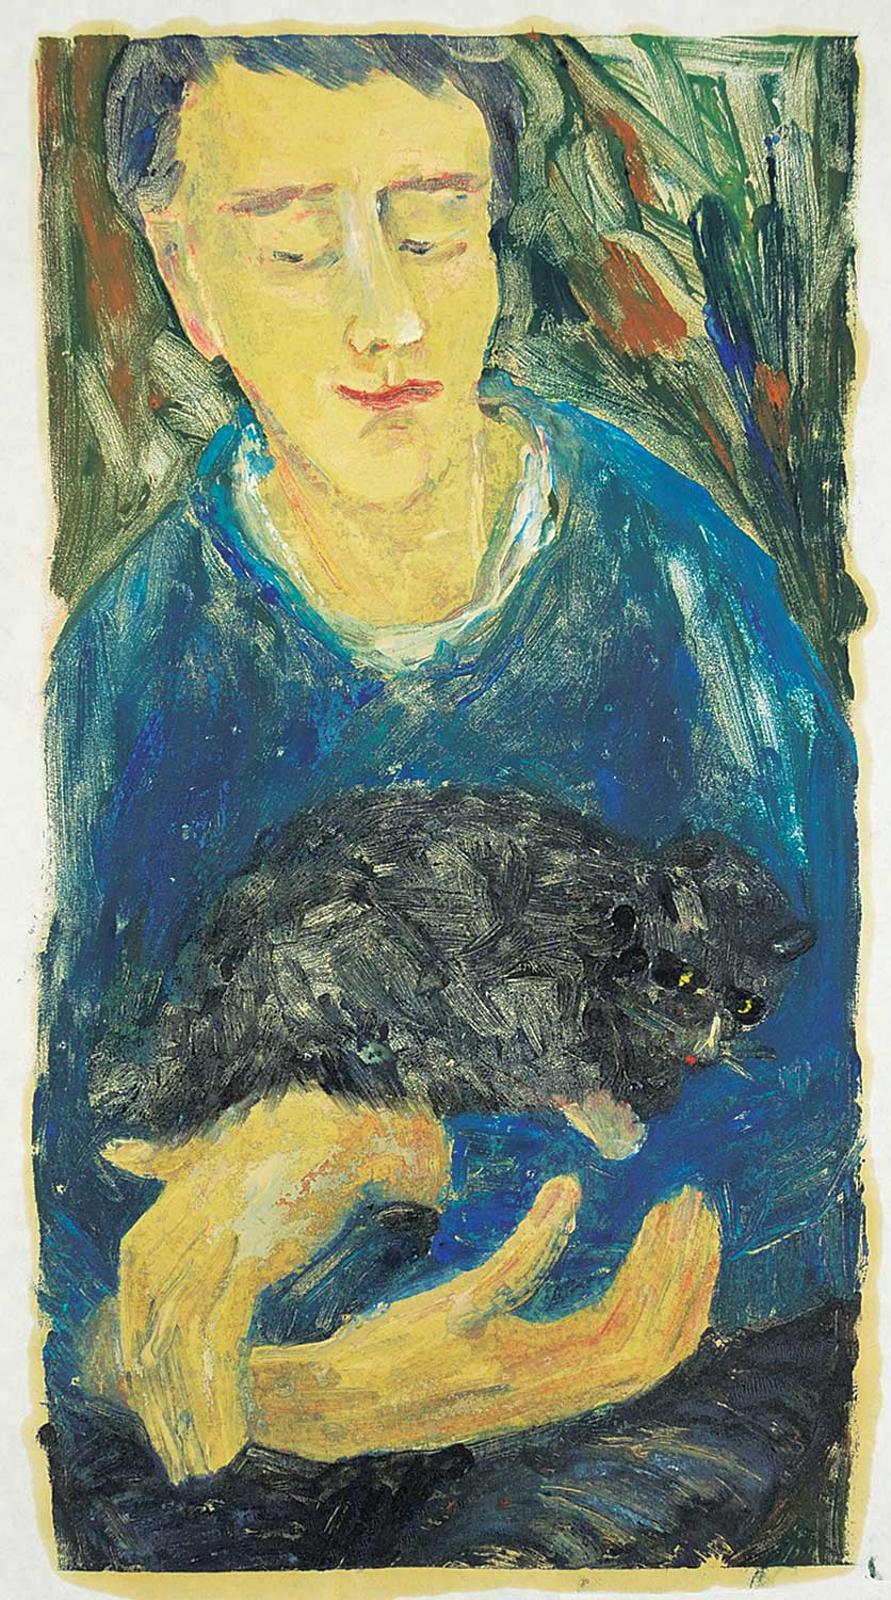 Dorothy Henzell Willis (1899-1988) - Untitled - A Purrfect Moment